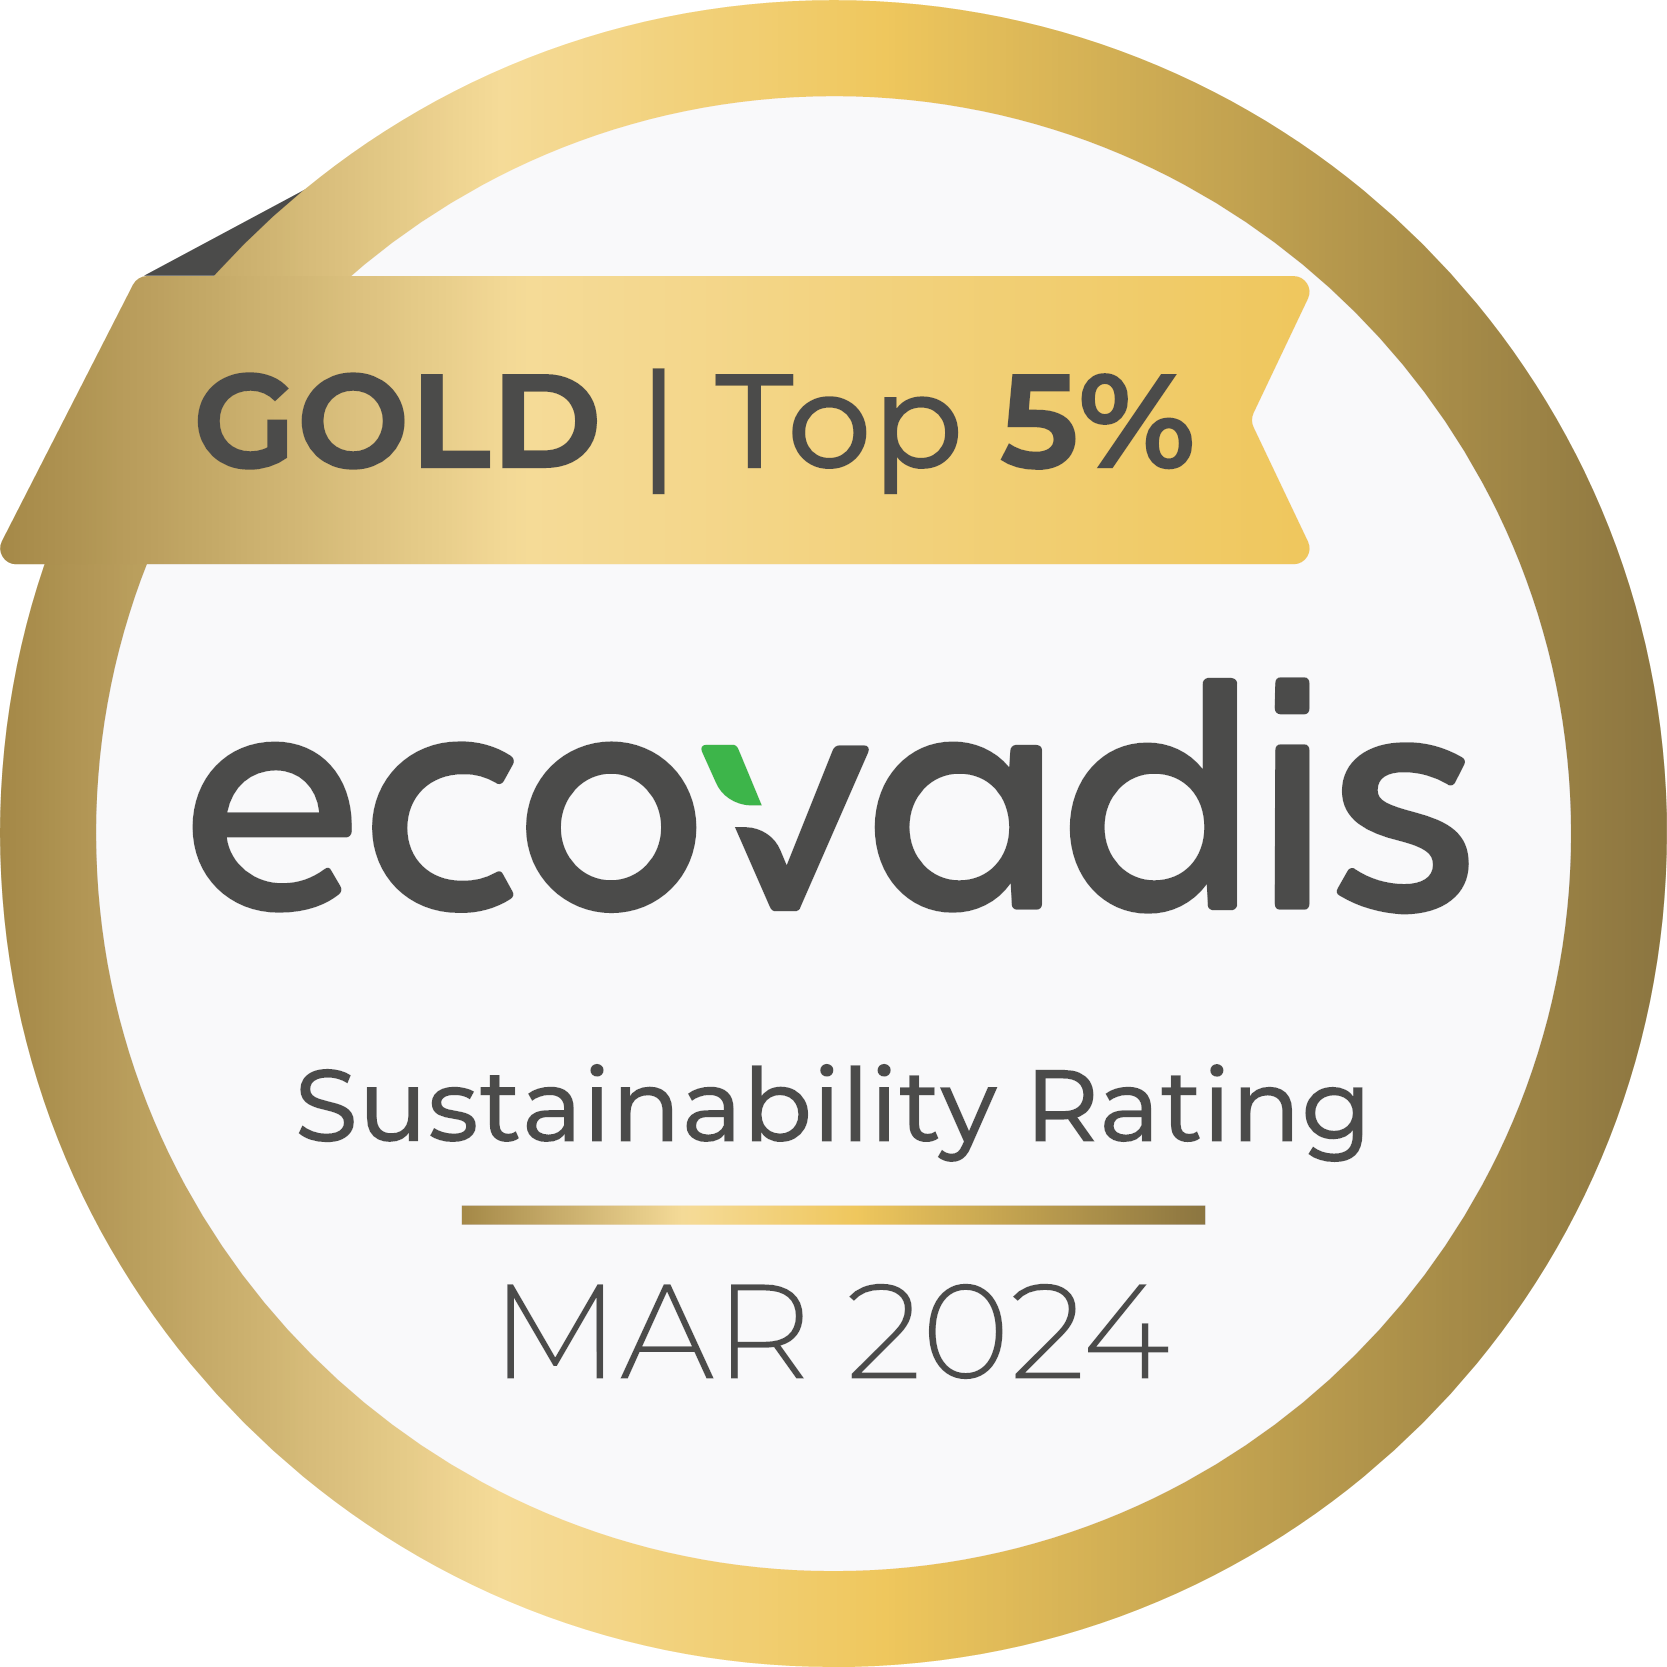 Certification Ecovadis 2022 Gold